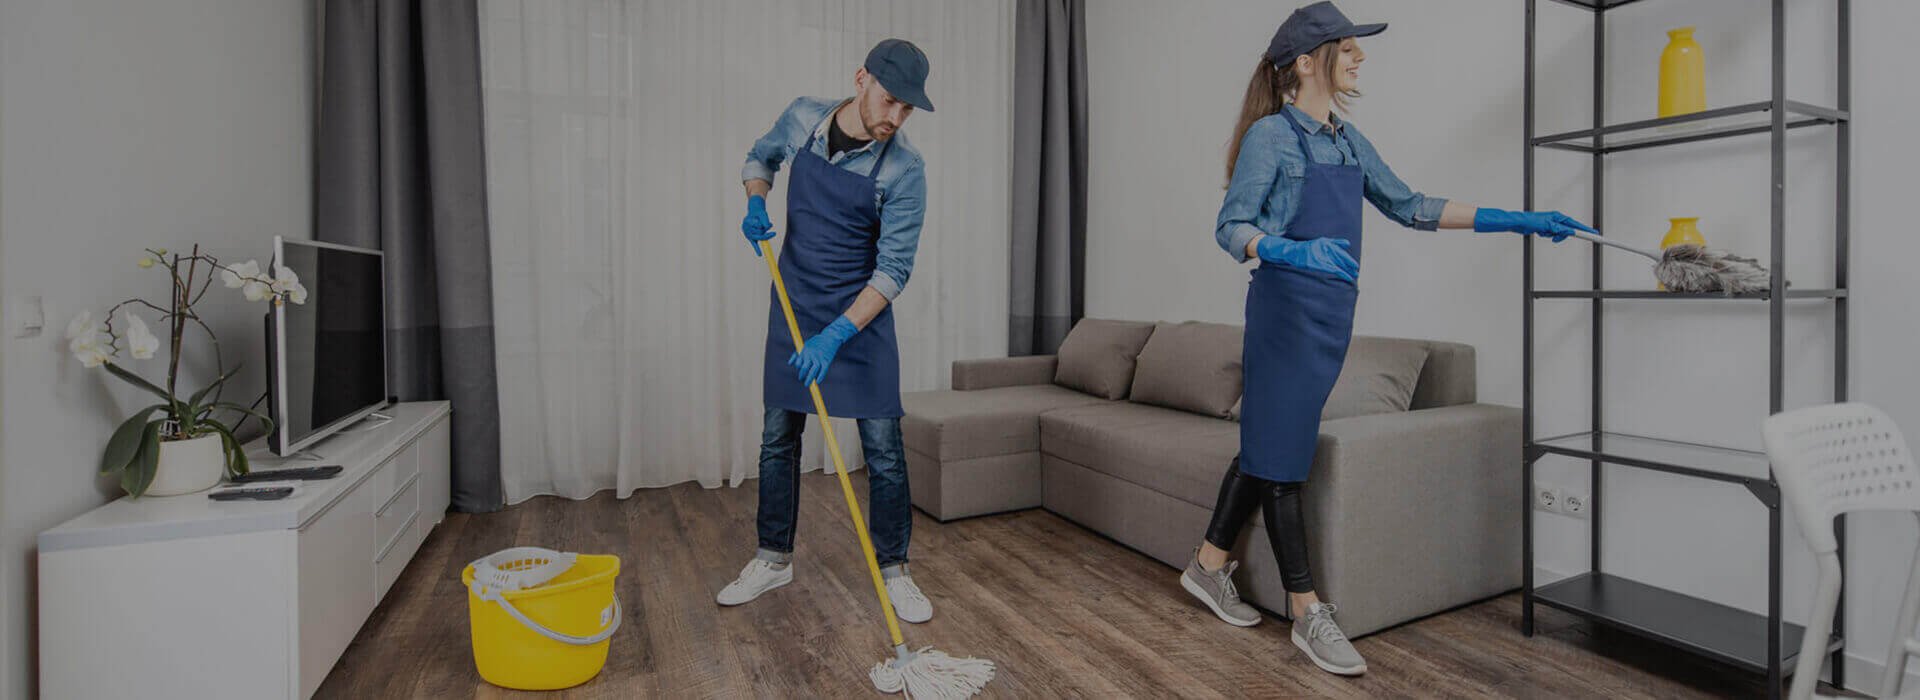 Professional Cleaning Services in Abu Dhabi